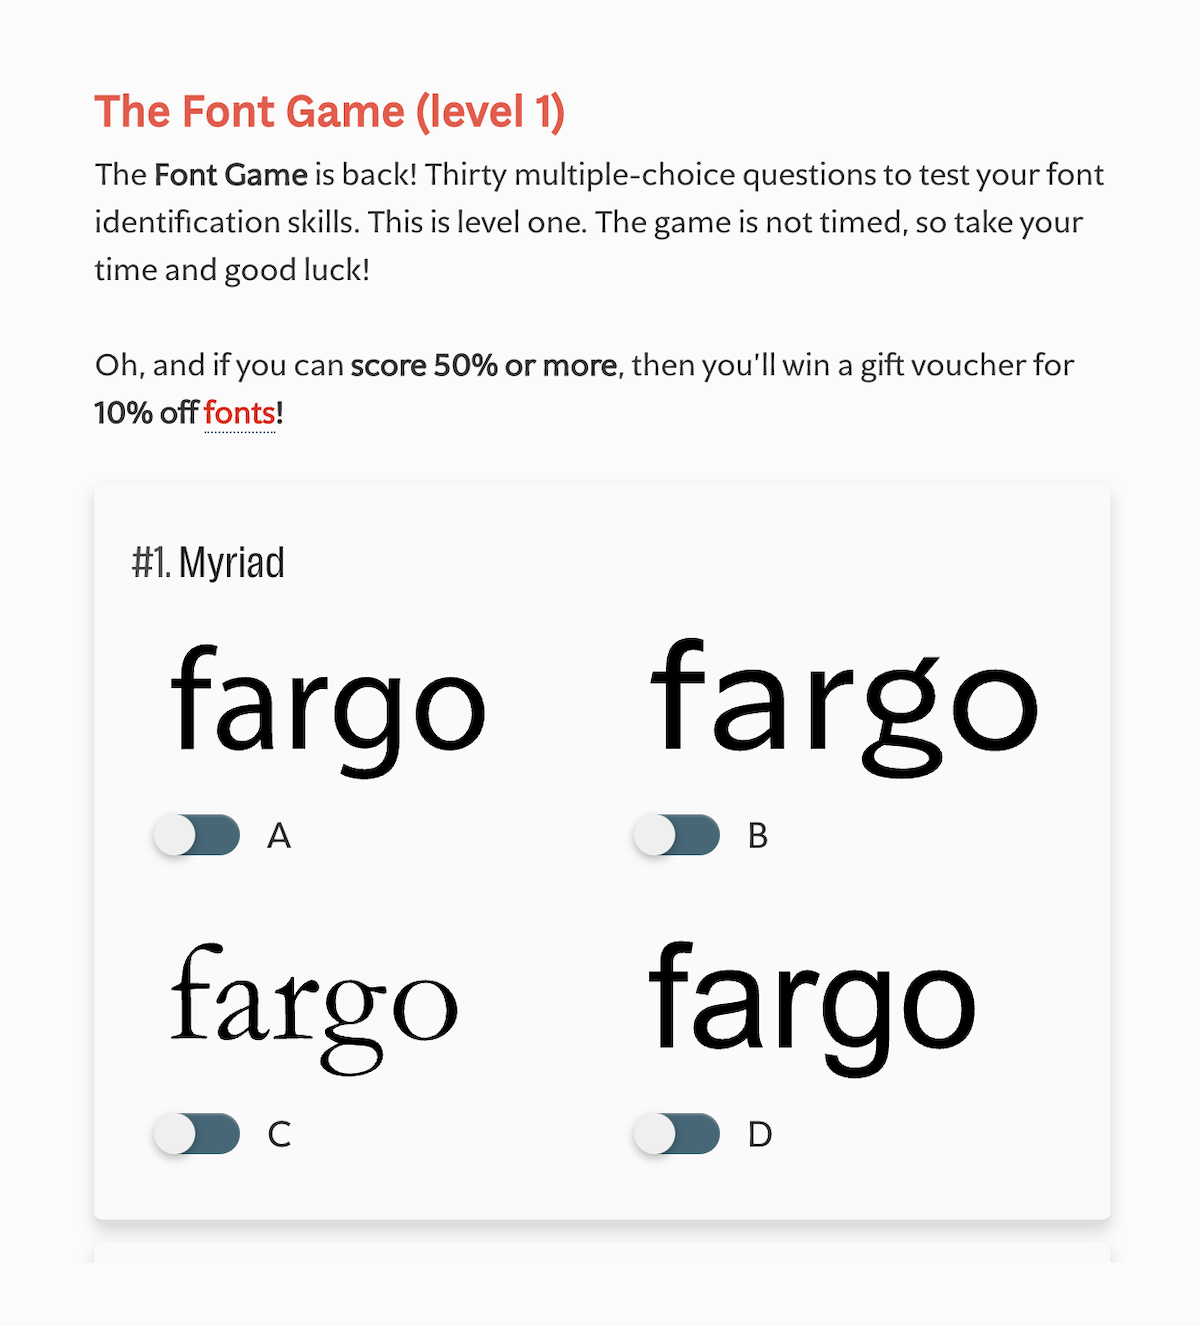 Best Games for Graphic Designers - The Font Game